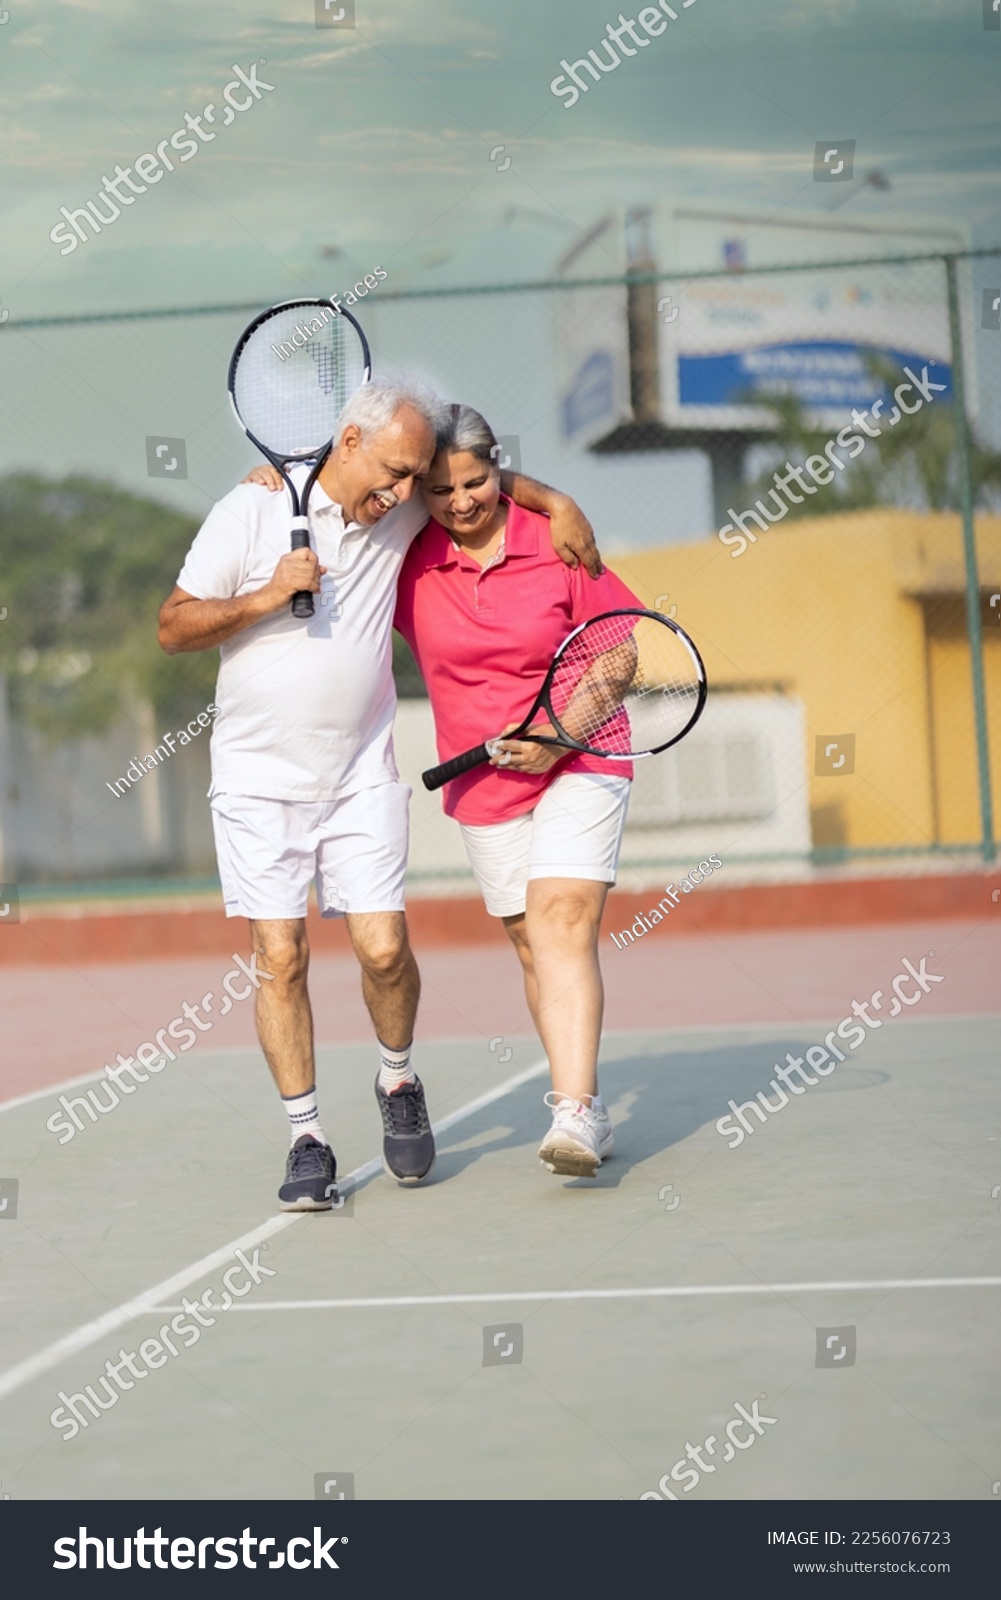 Senior man and woman hugging after playing a game of tennis at an outdoor court. #2256076723